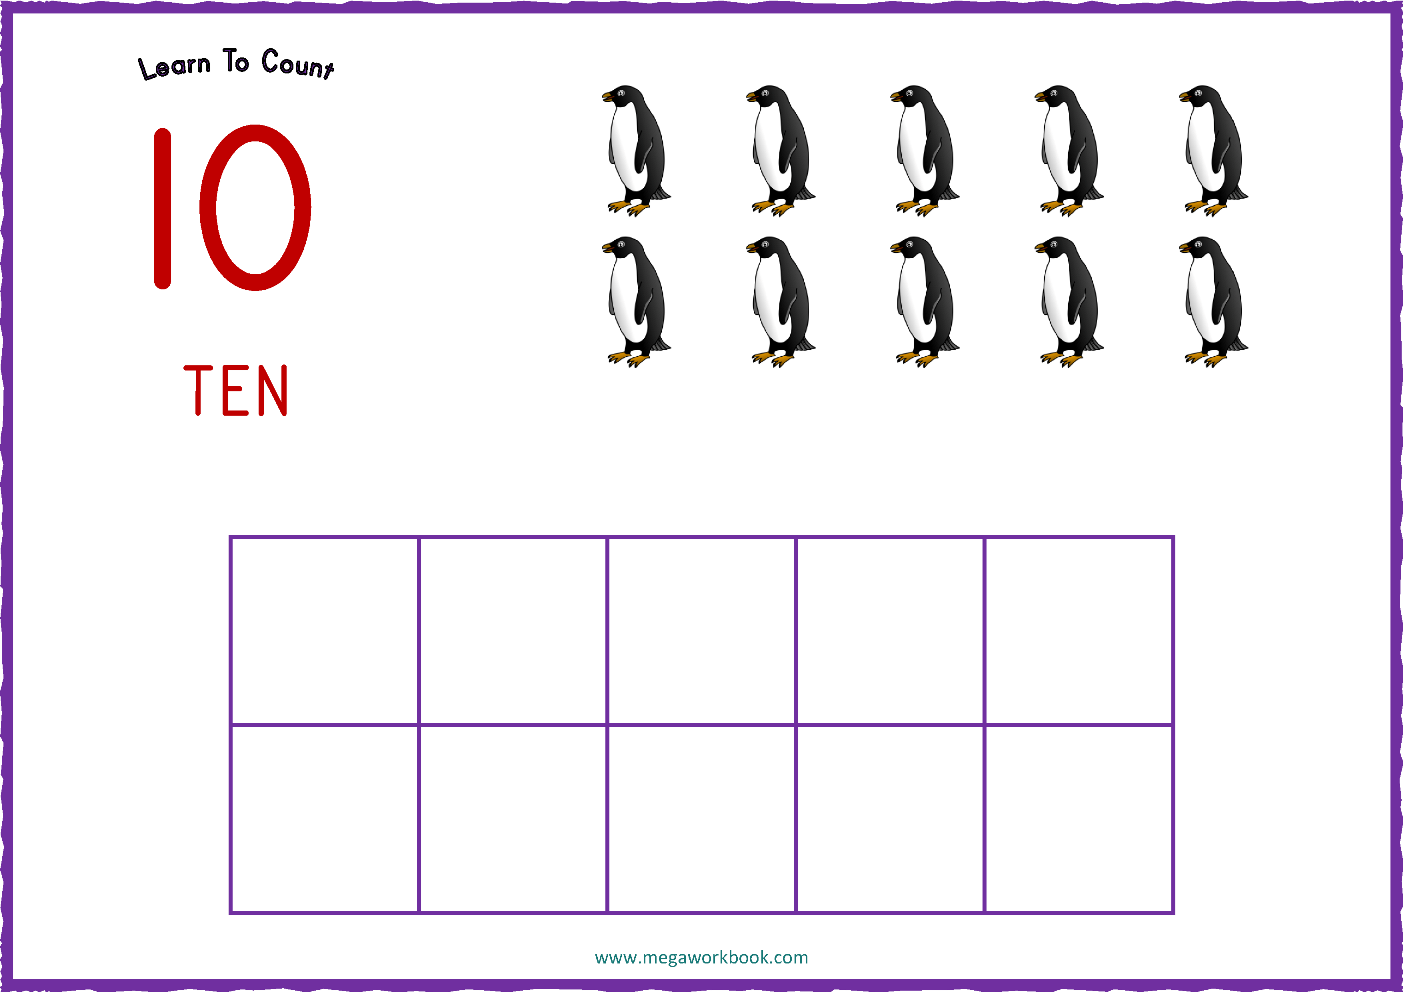 Essential Learning Products Ten Frame Cards A Pictorial Approach to Making 10 